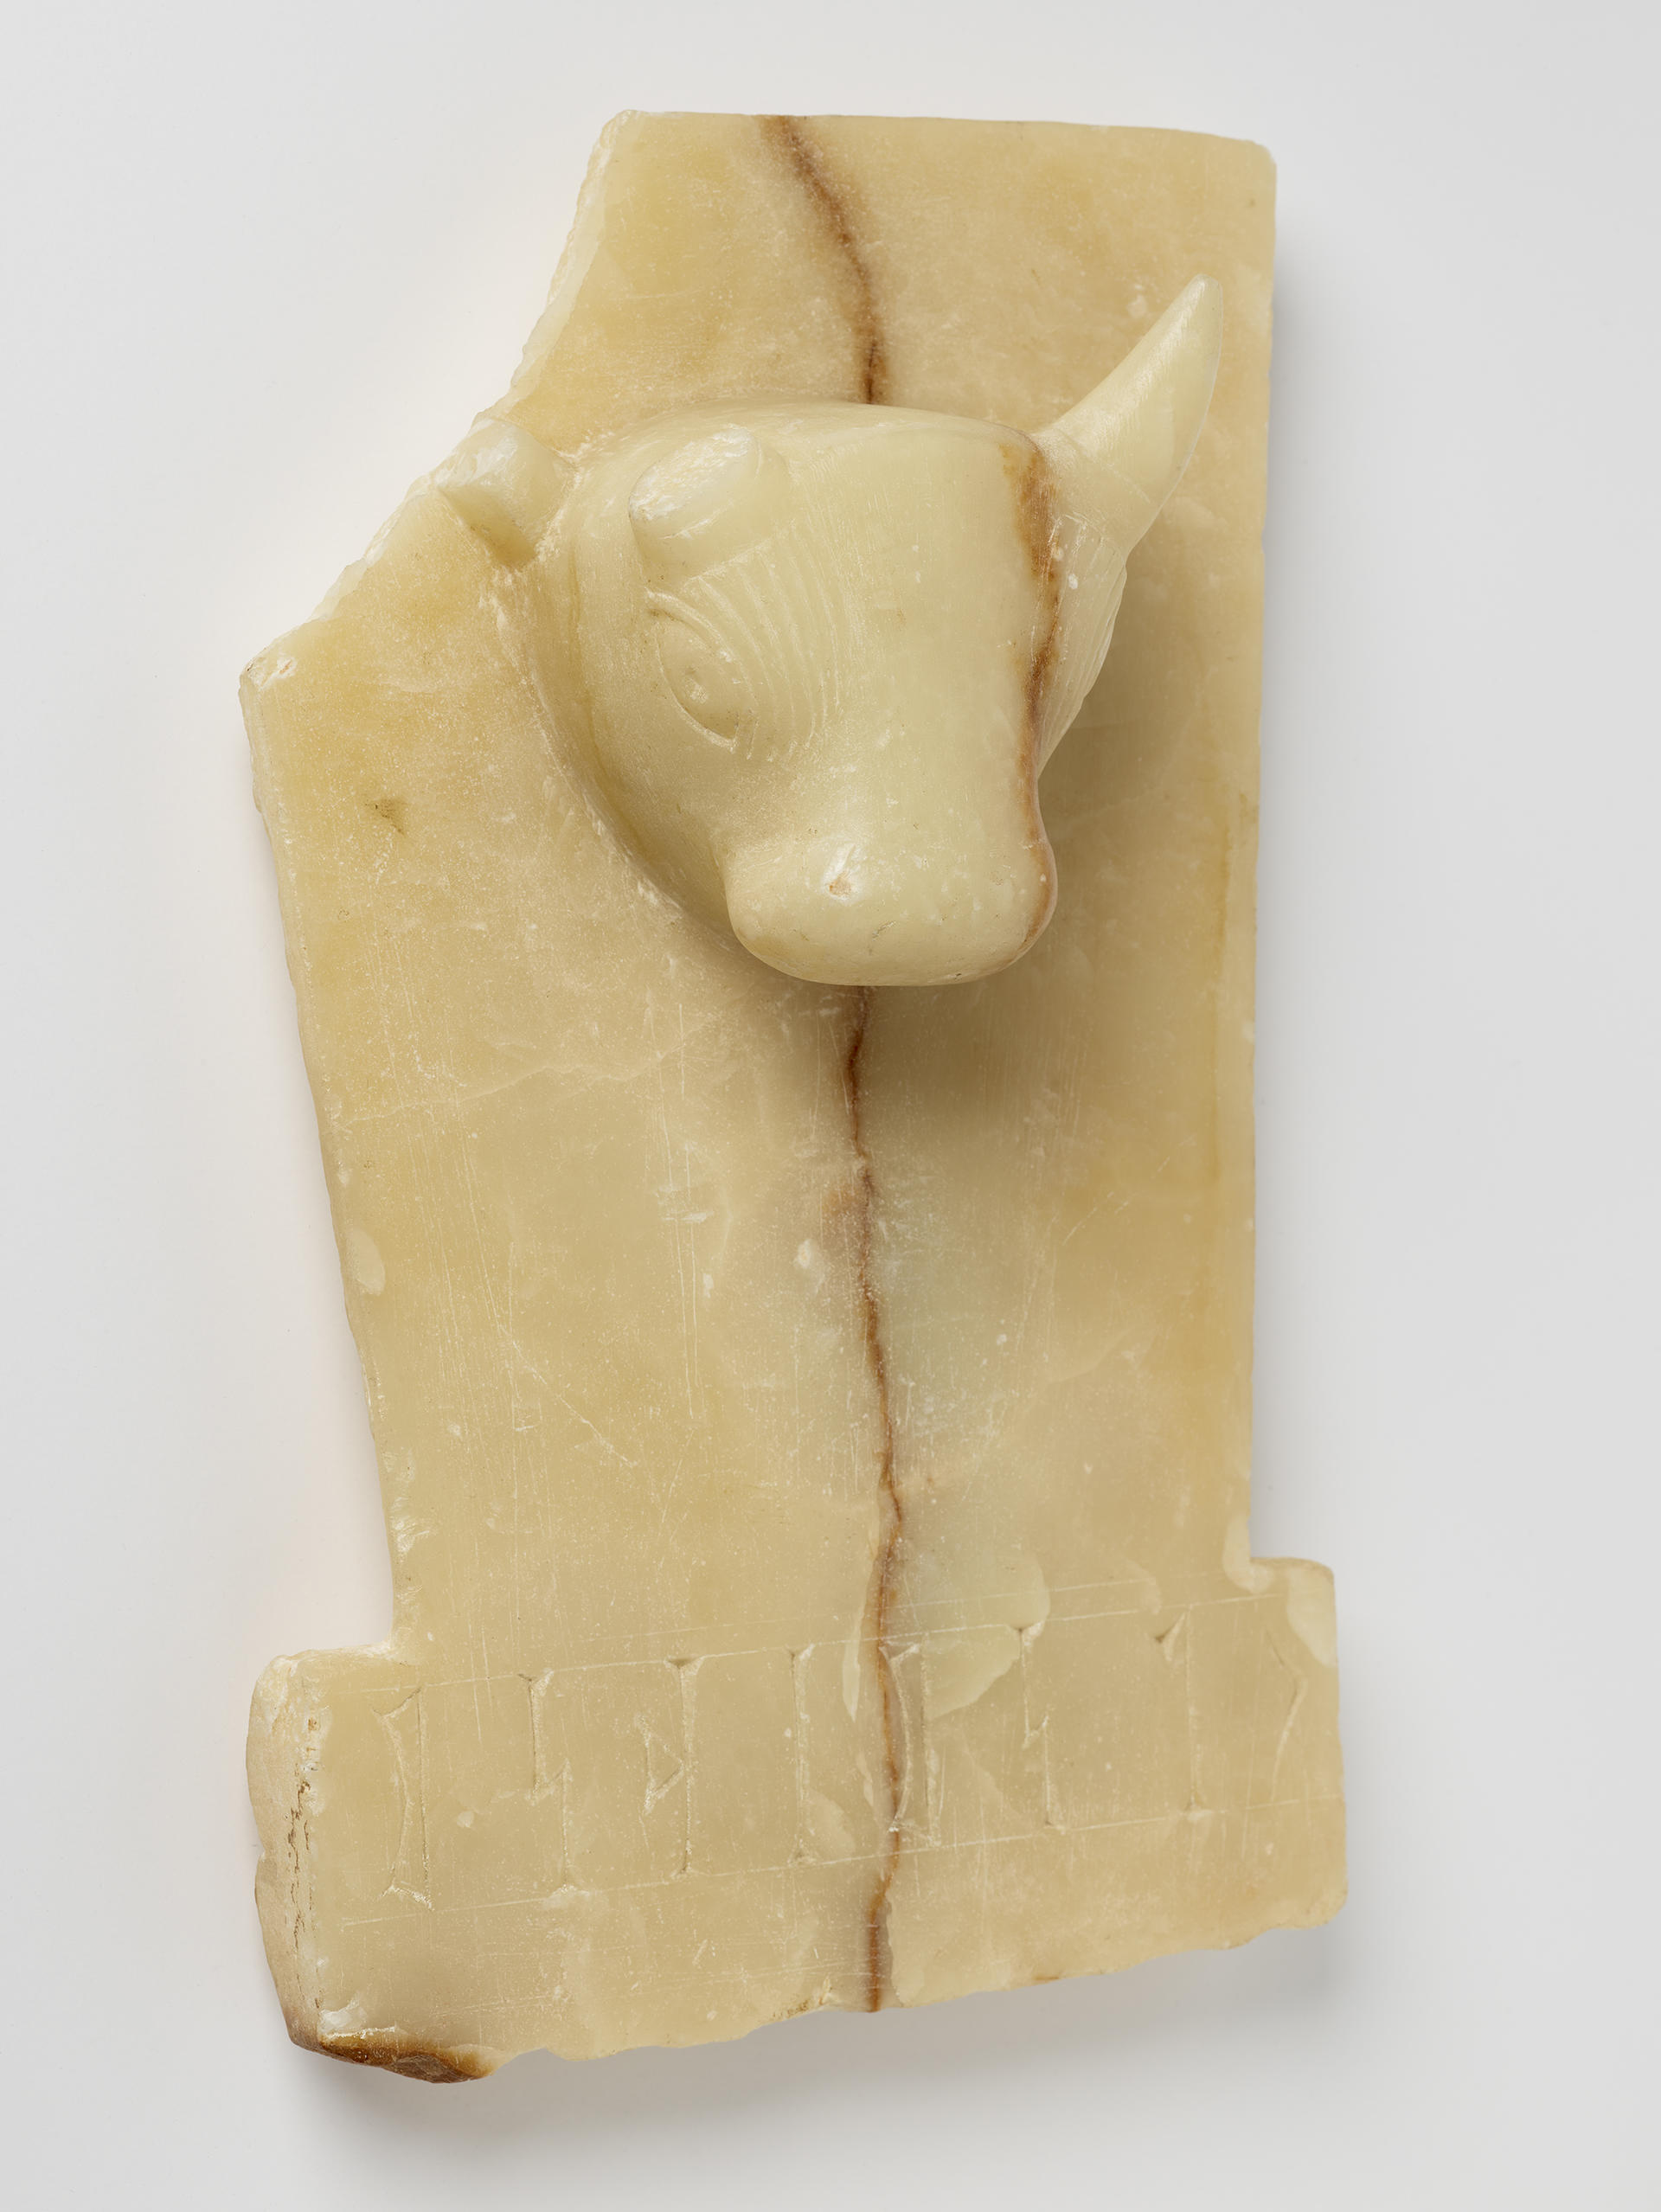 Cream rectangular stone with a sculpted bull’s head emerging from the upper center. Its upper left is broken off. A brown crack runs vertically down the center.